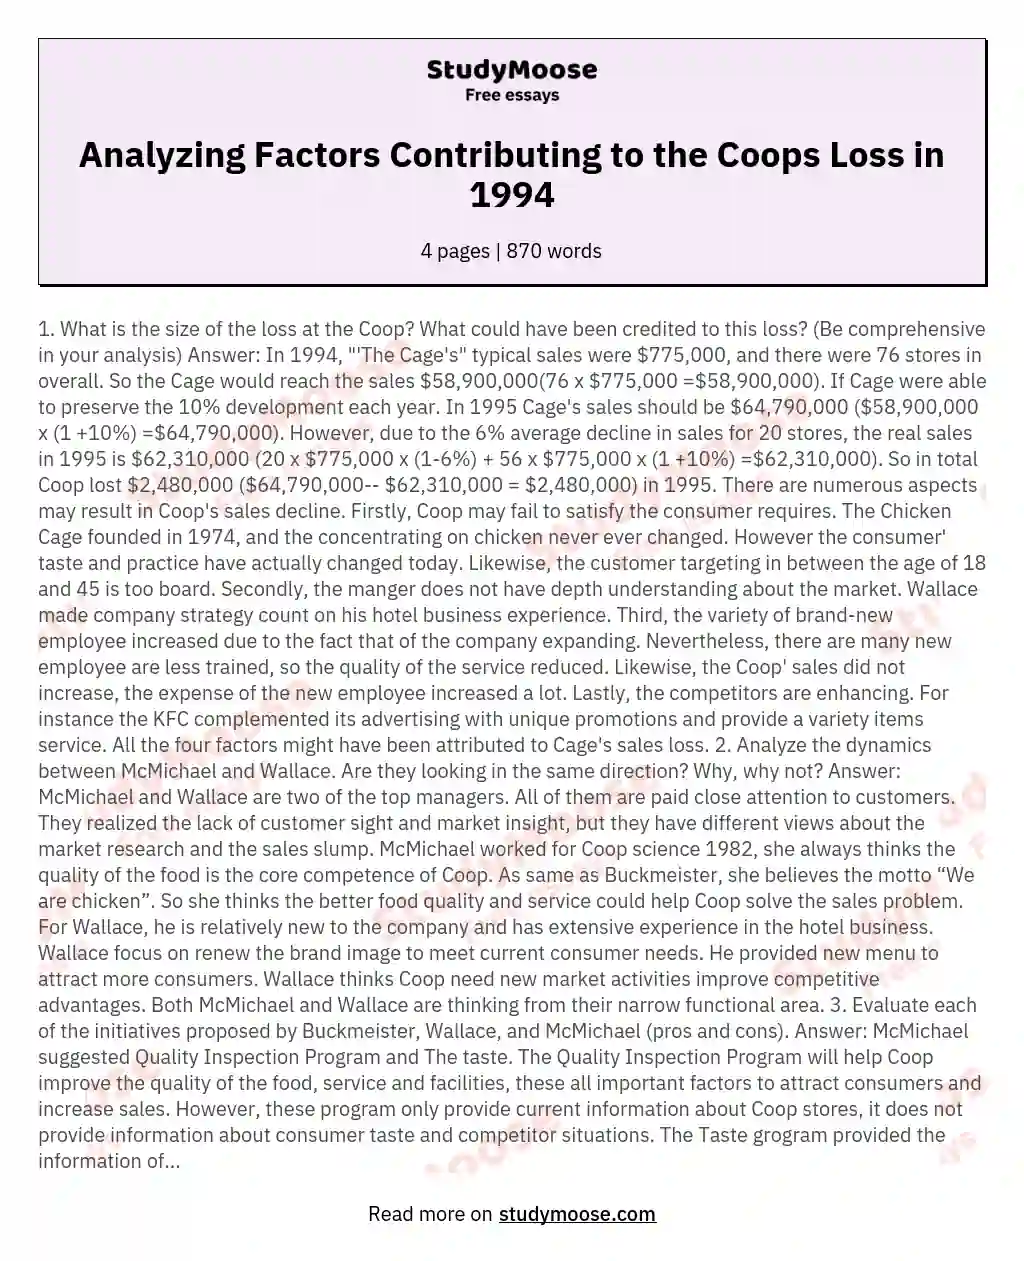 Analyzing Factors Contributing to the Coops Loss in 1994 essay